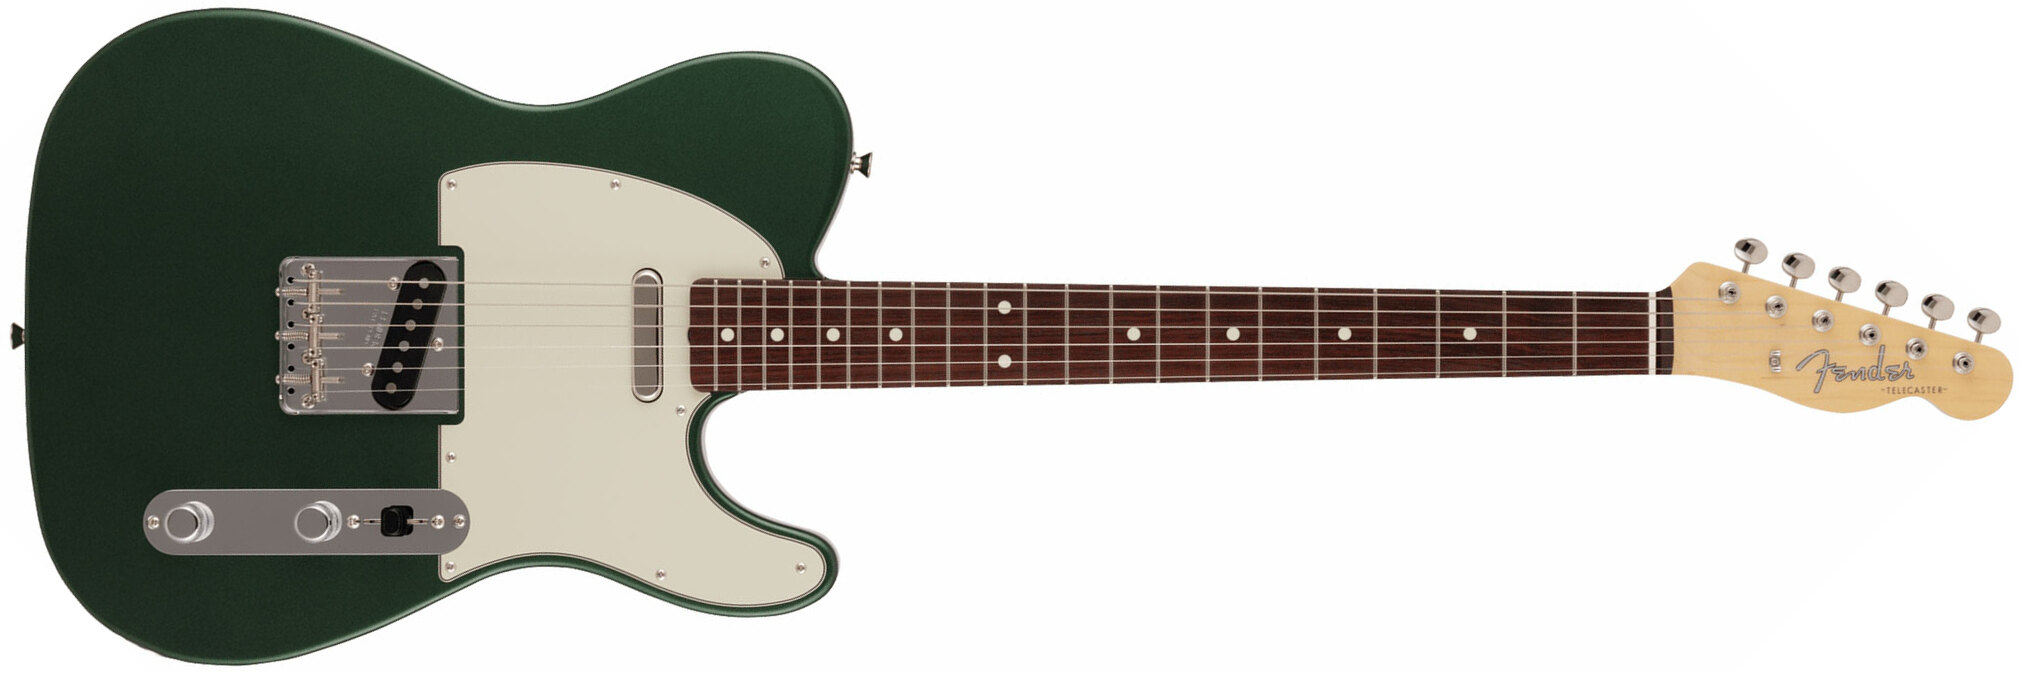 Fender Tele Traditional 60s Mij 2s Ht Rw - Aged Sherwood Green Metallic - Guitare Électrique Forme Tel - Main picture